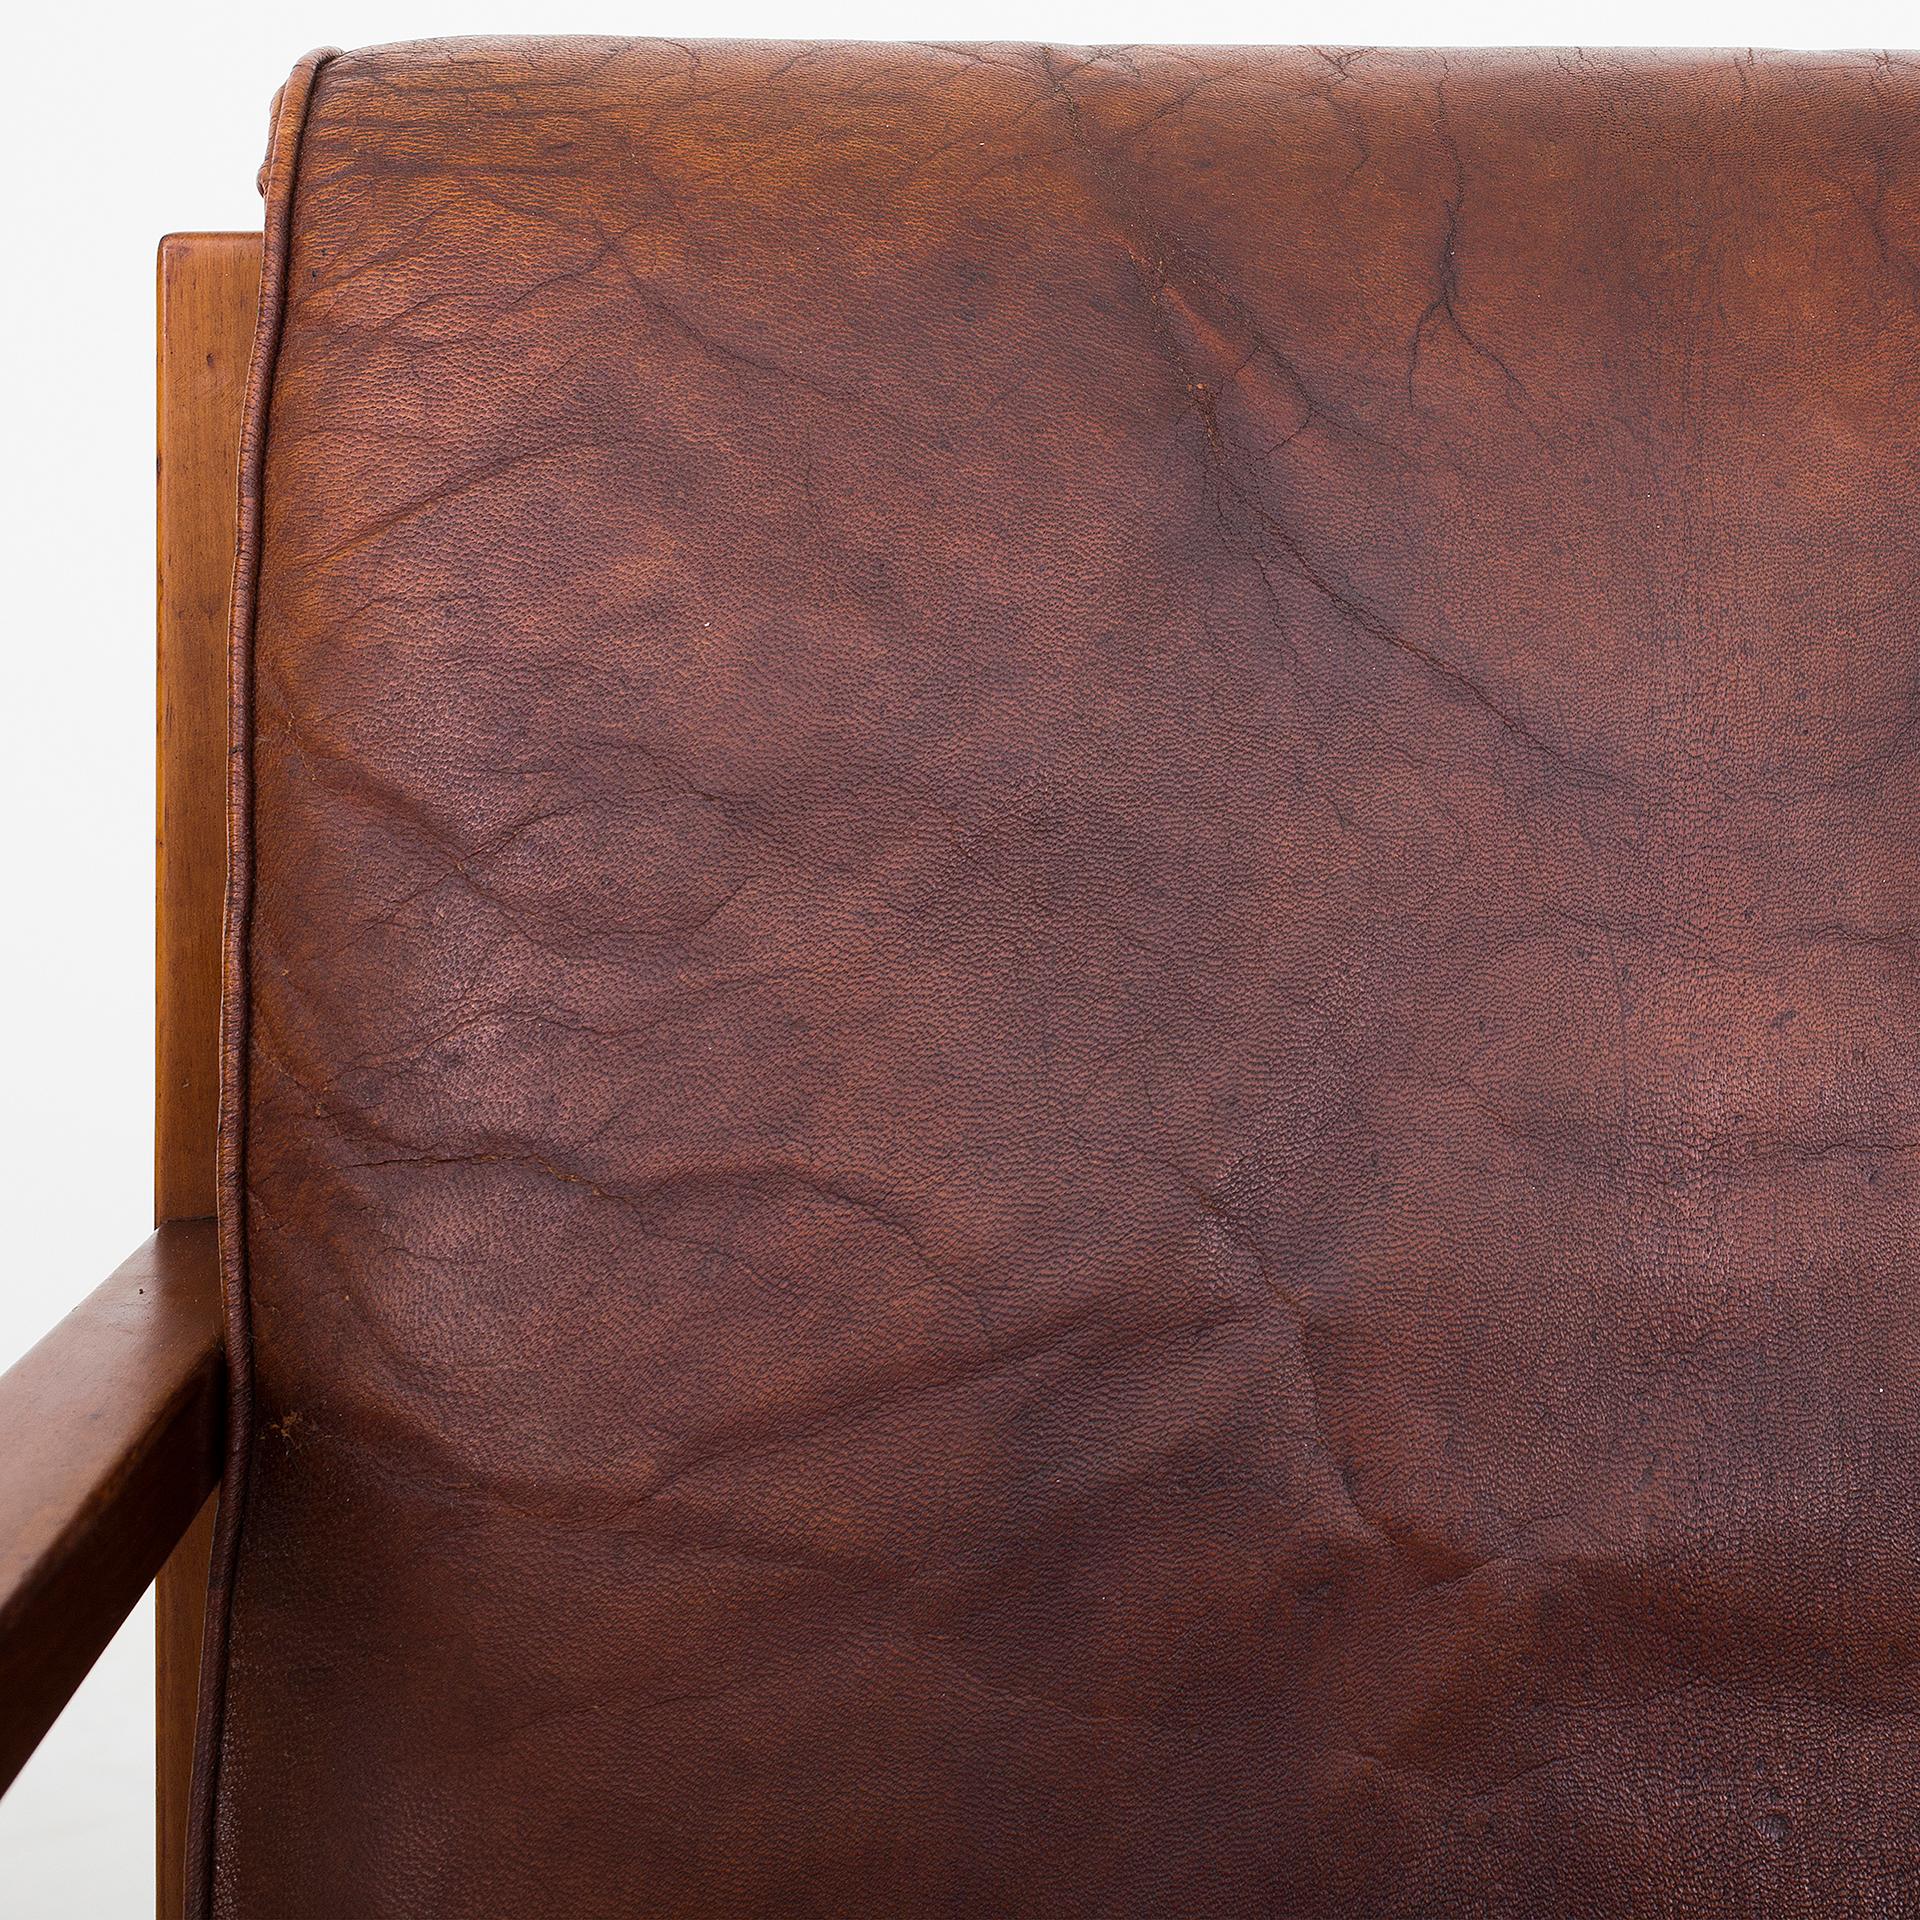 Easychair in mahogany and patinated Niger leather In Fair Condition For Sale In Copenhagen, DK